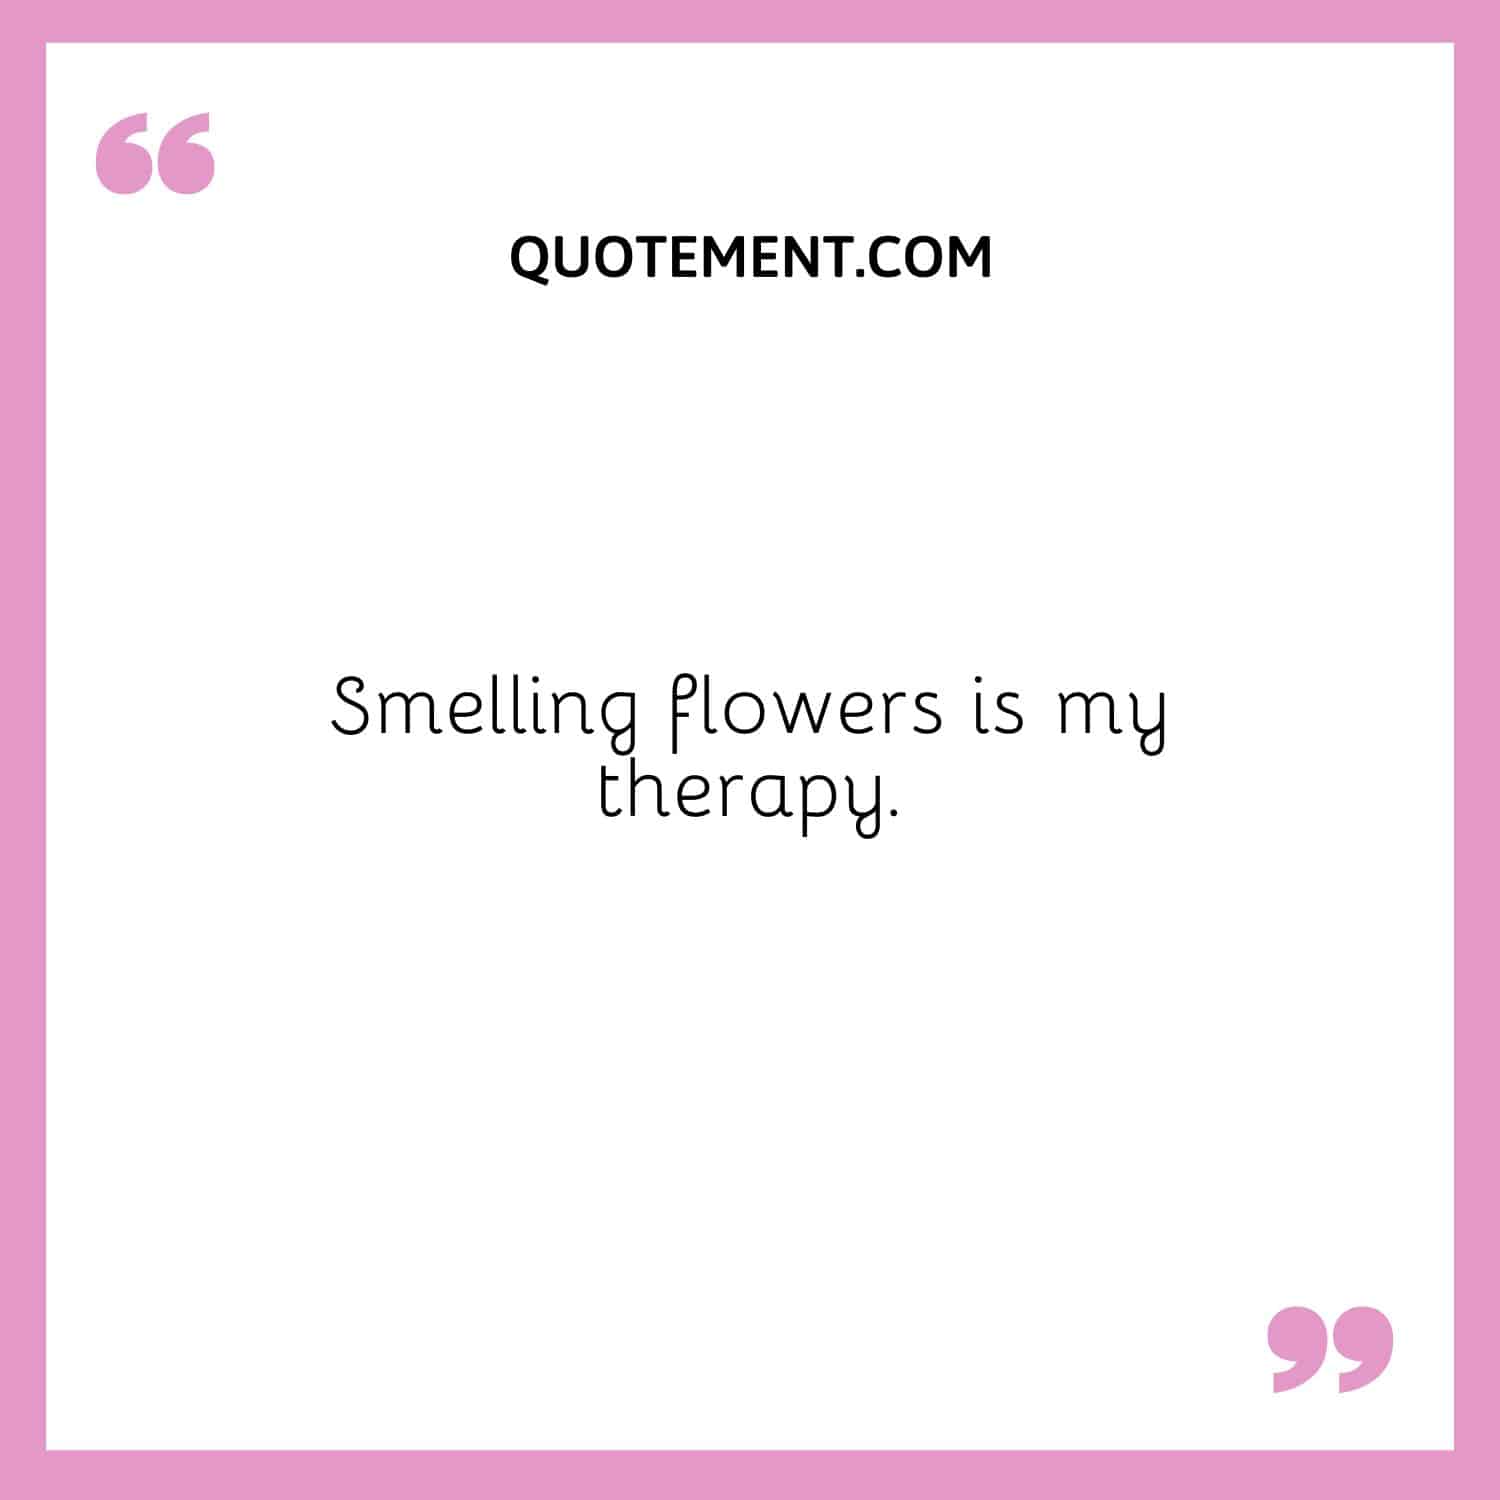 Smelling flowers is my therapy